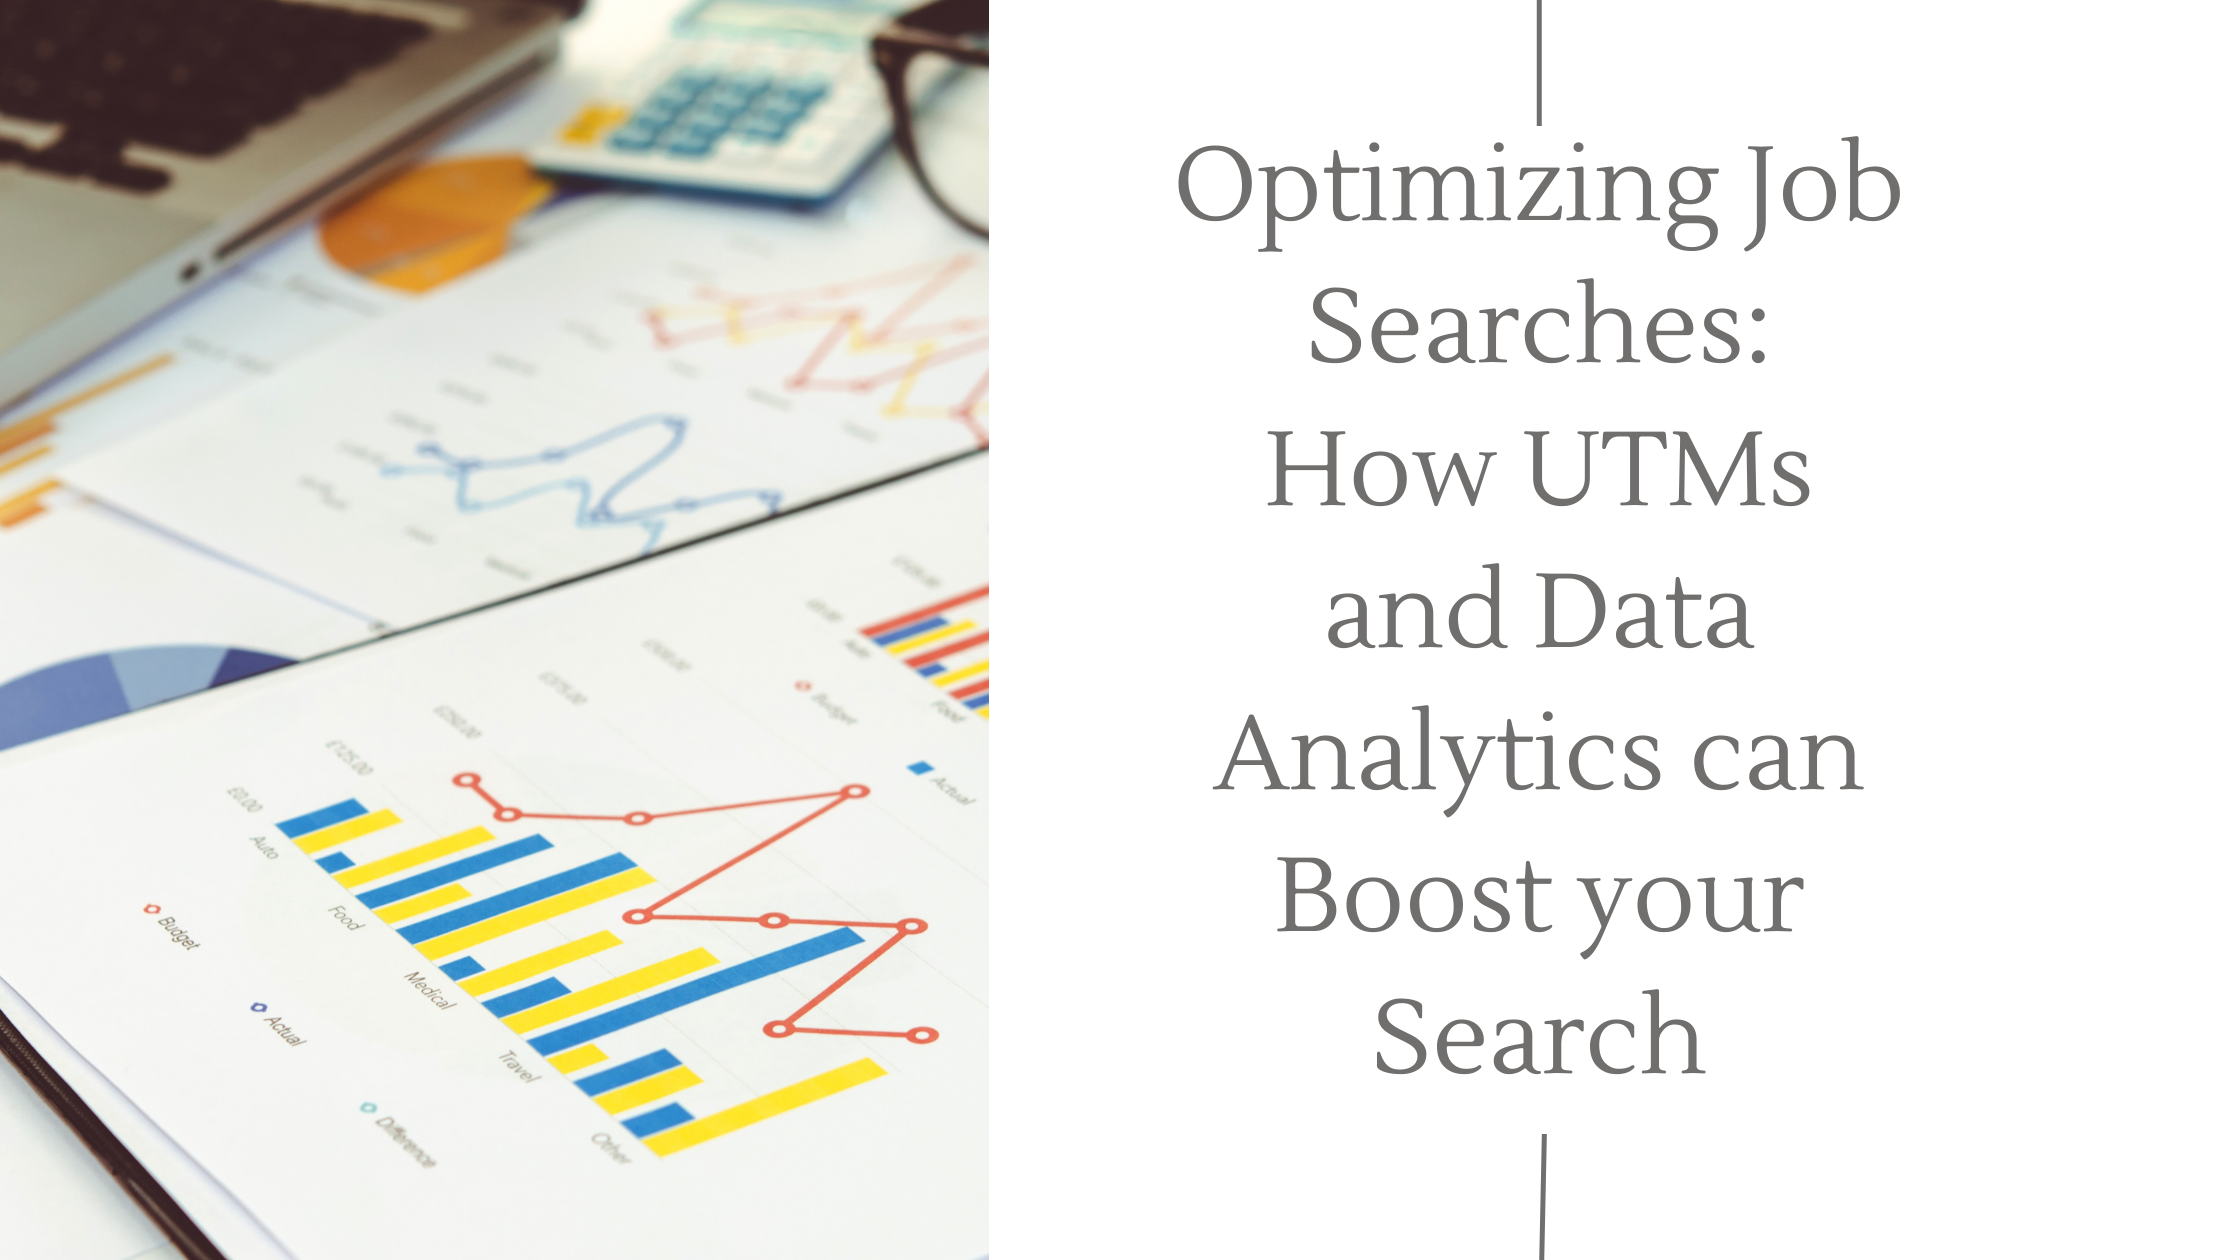 Featured image for “Optimizing Job Searches:  How UTMs and Data Analytics can Boost your Search”